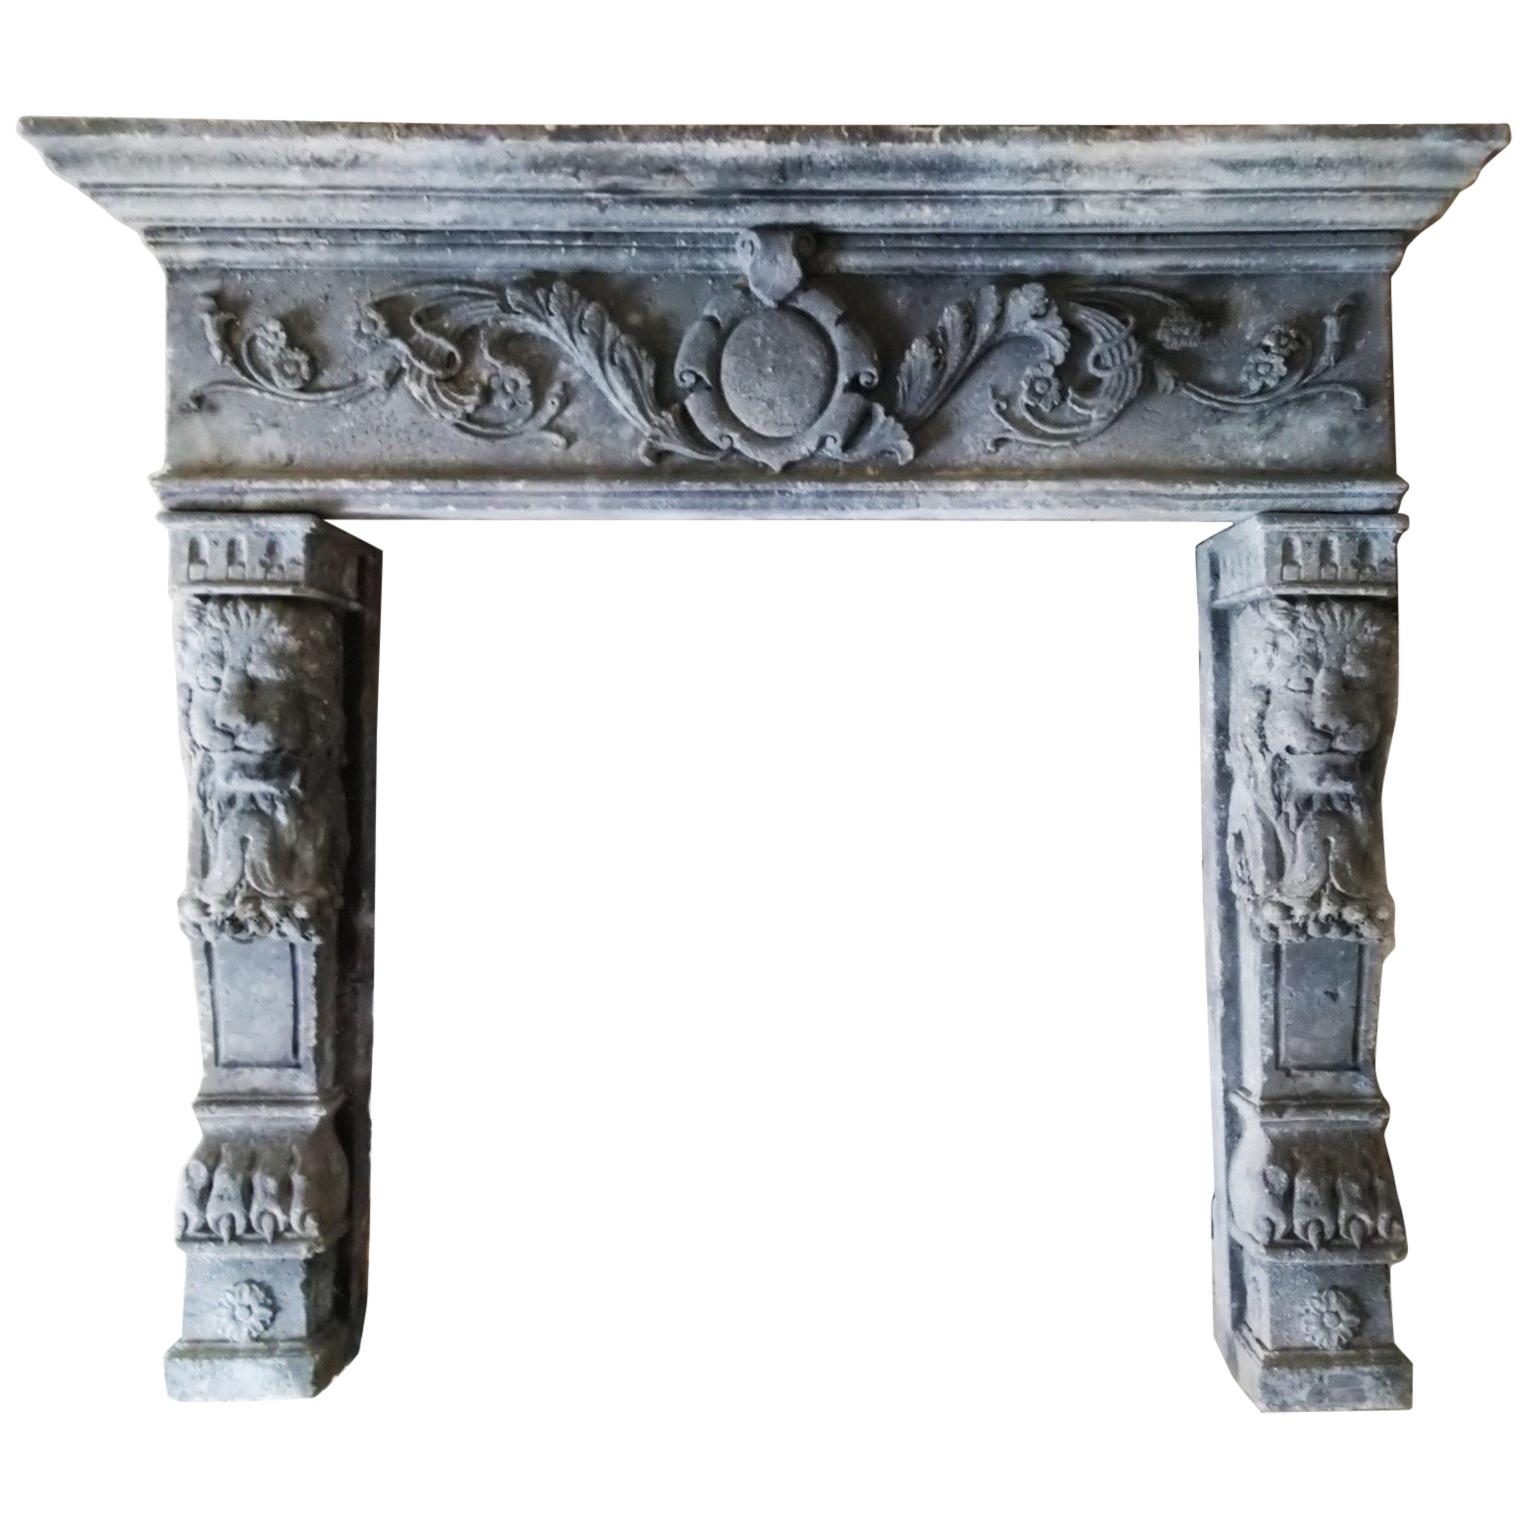 Late 19th Century Italian Stone Surround with Lions and Lion Paws For Sale